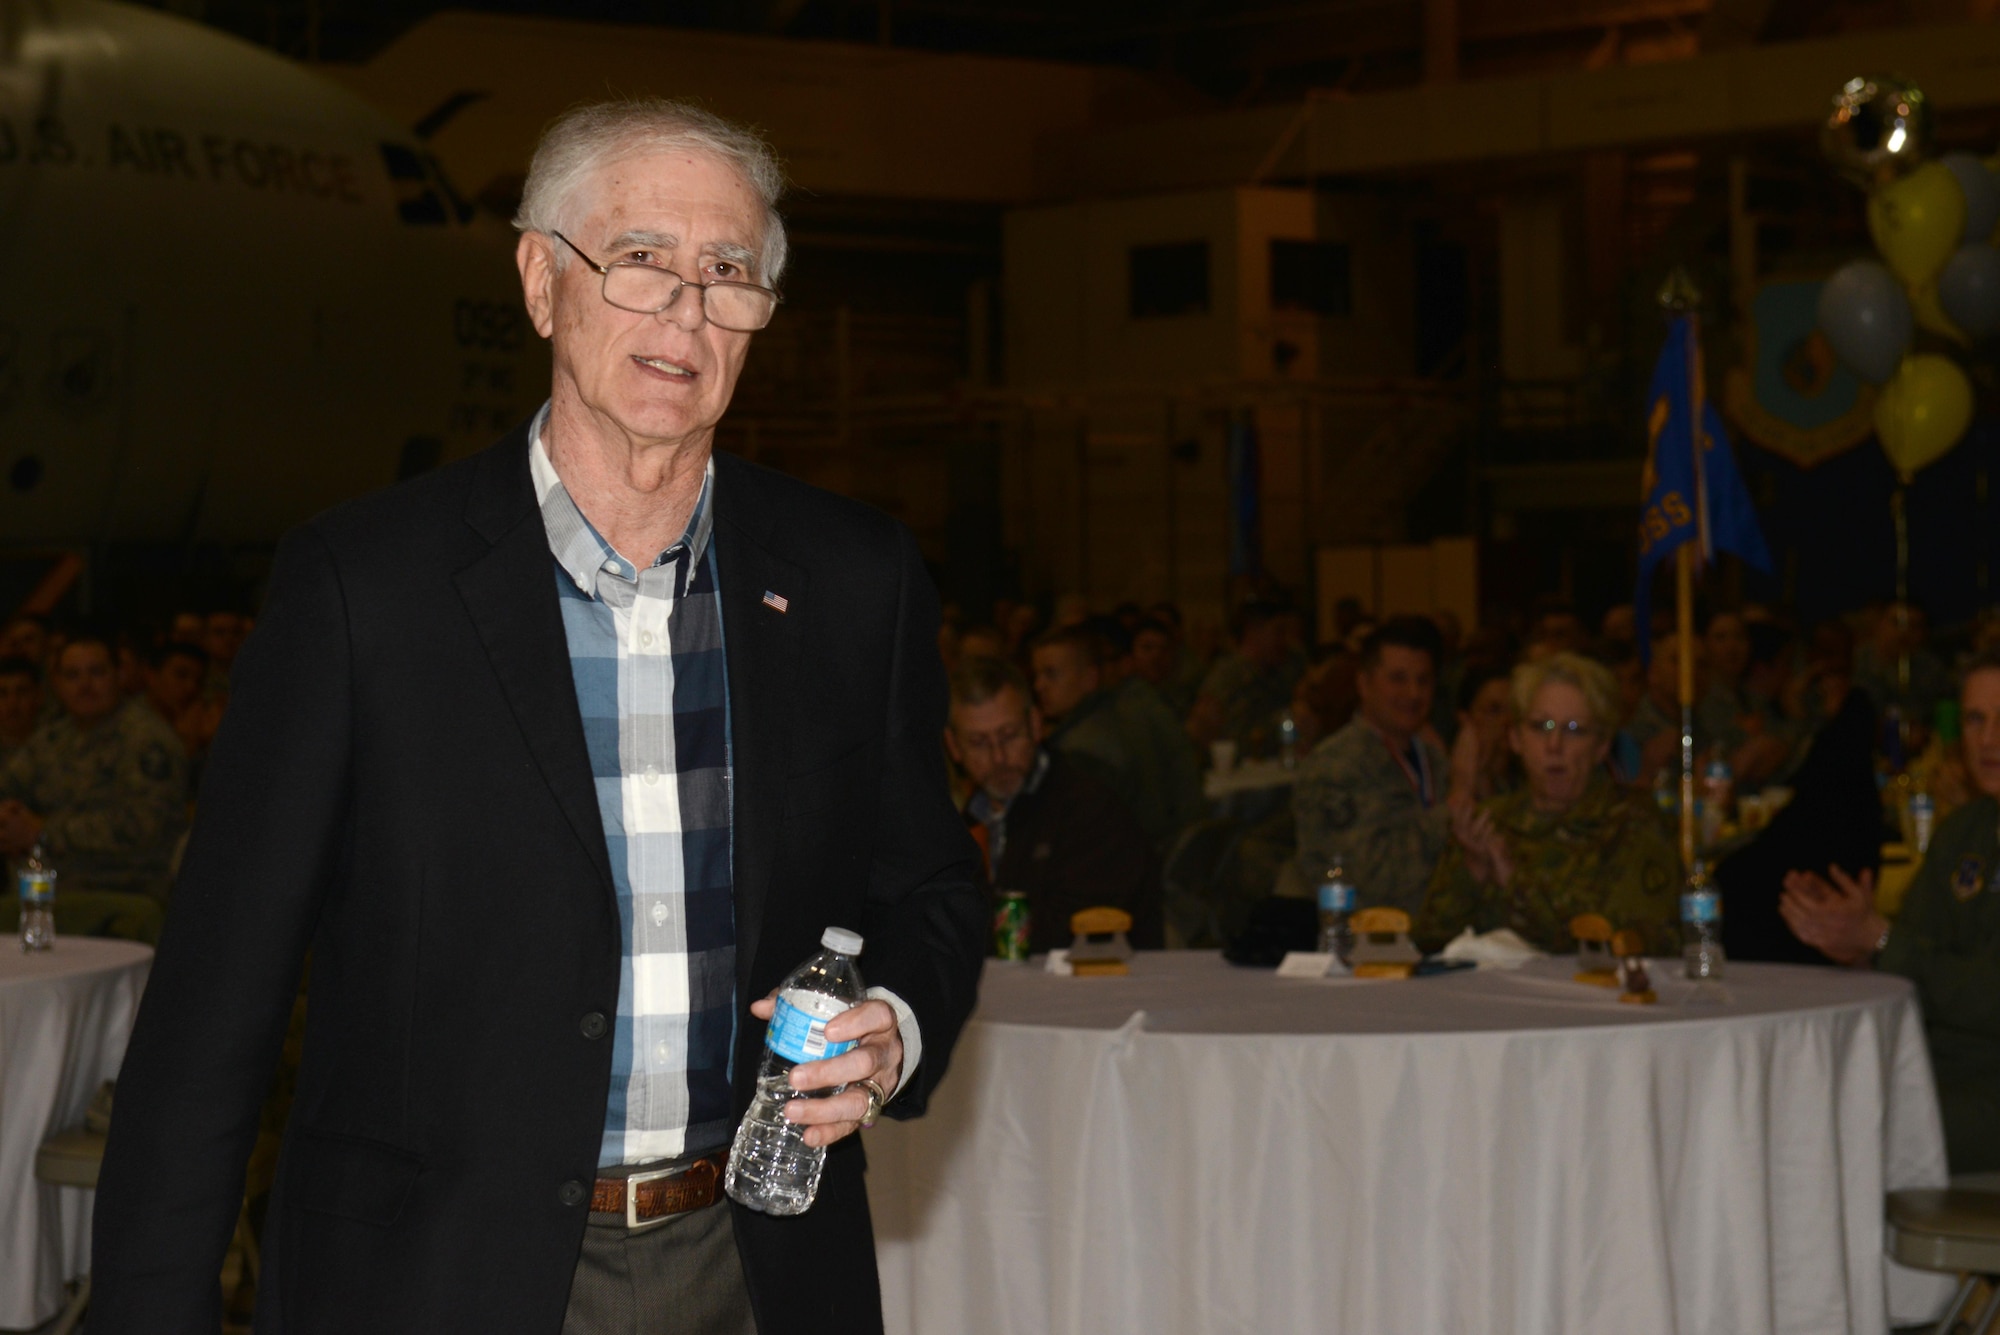 Donald W. Sheppard, a retired Air Force Major General, speaks at the 3rd Wing annual award ceremony in Hangar 1 at Joint Base Elmendorf-Richardson, Alaska, Jan. 20, 2017. Sheppard, a pilot with more than 5,000 flying hours, and 247 combat missions during the Vietnam War, spoke about his experiences in the Air Force and provided insight into how the military can keep improving. 